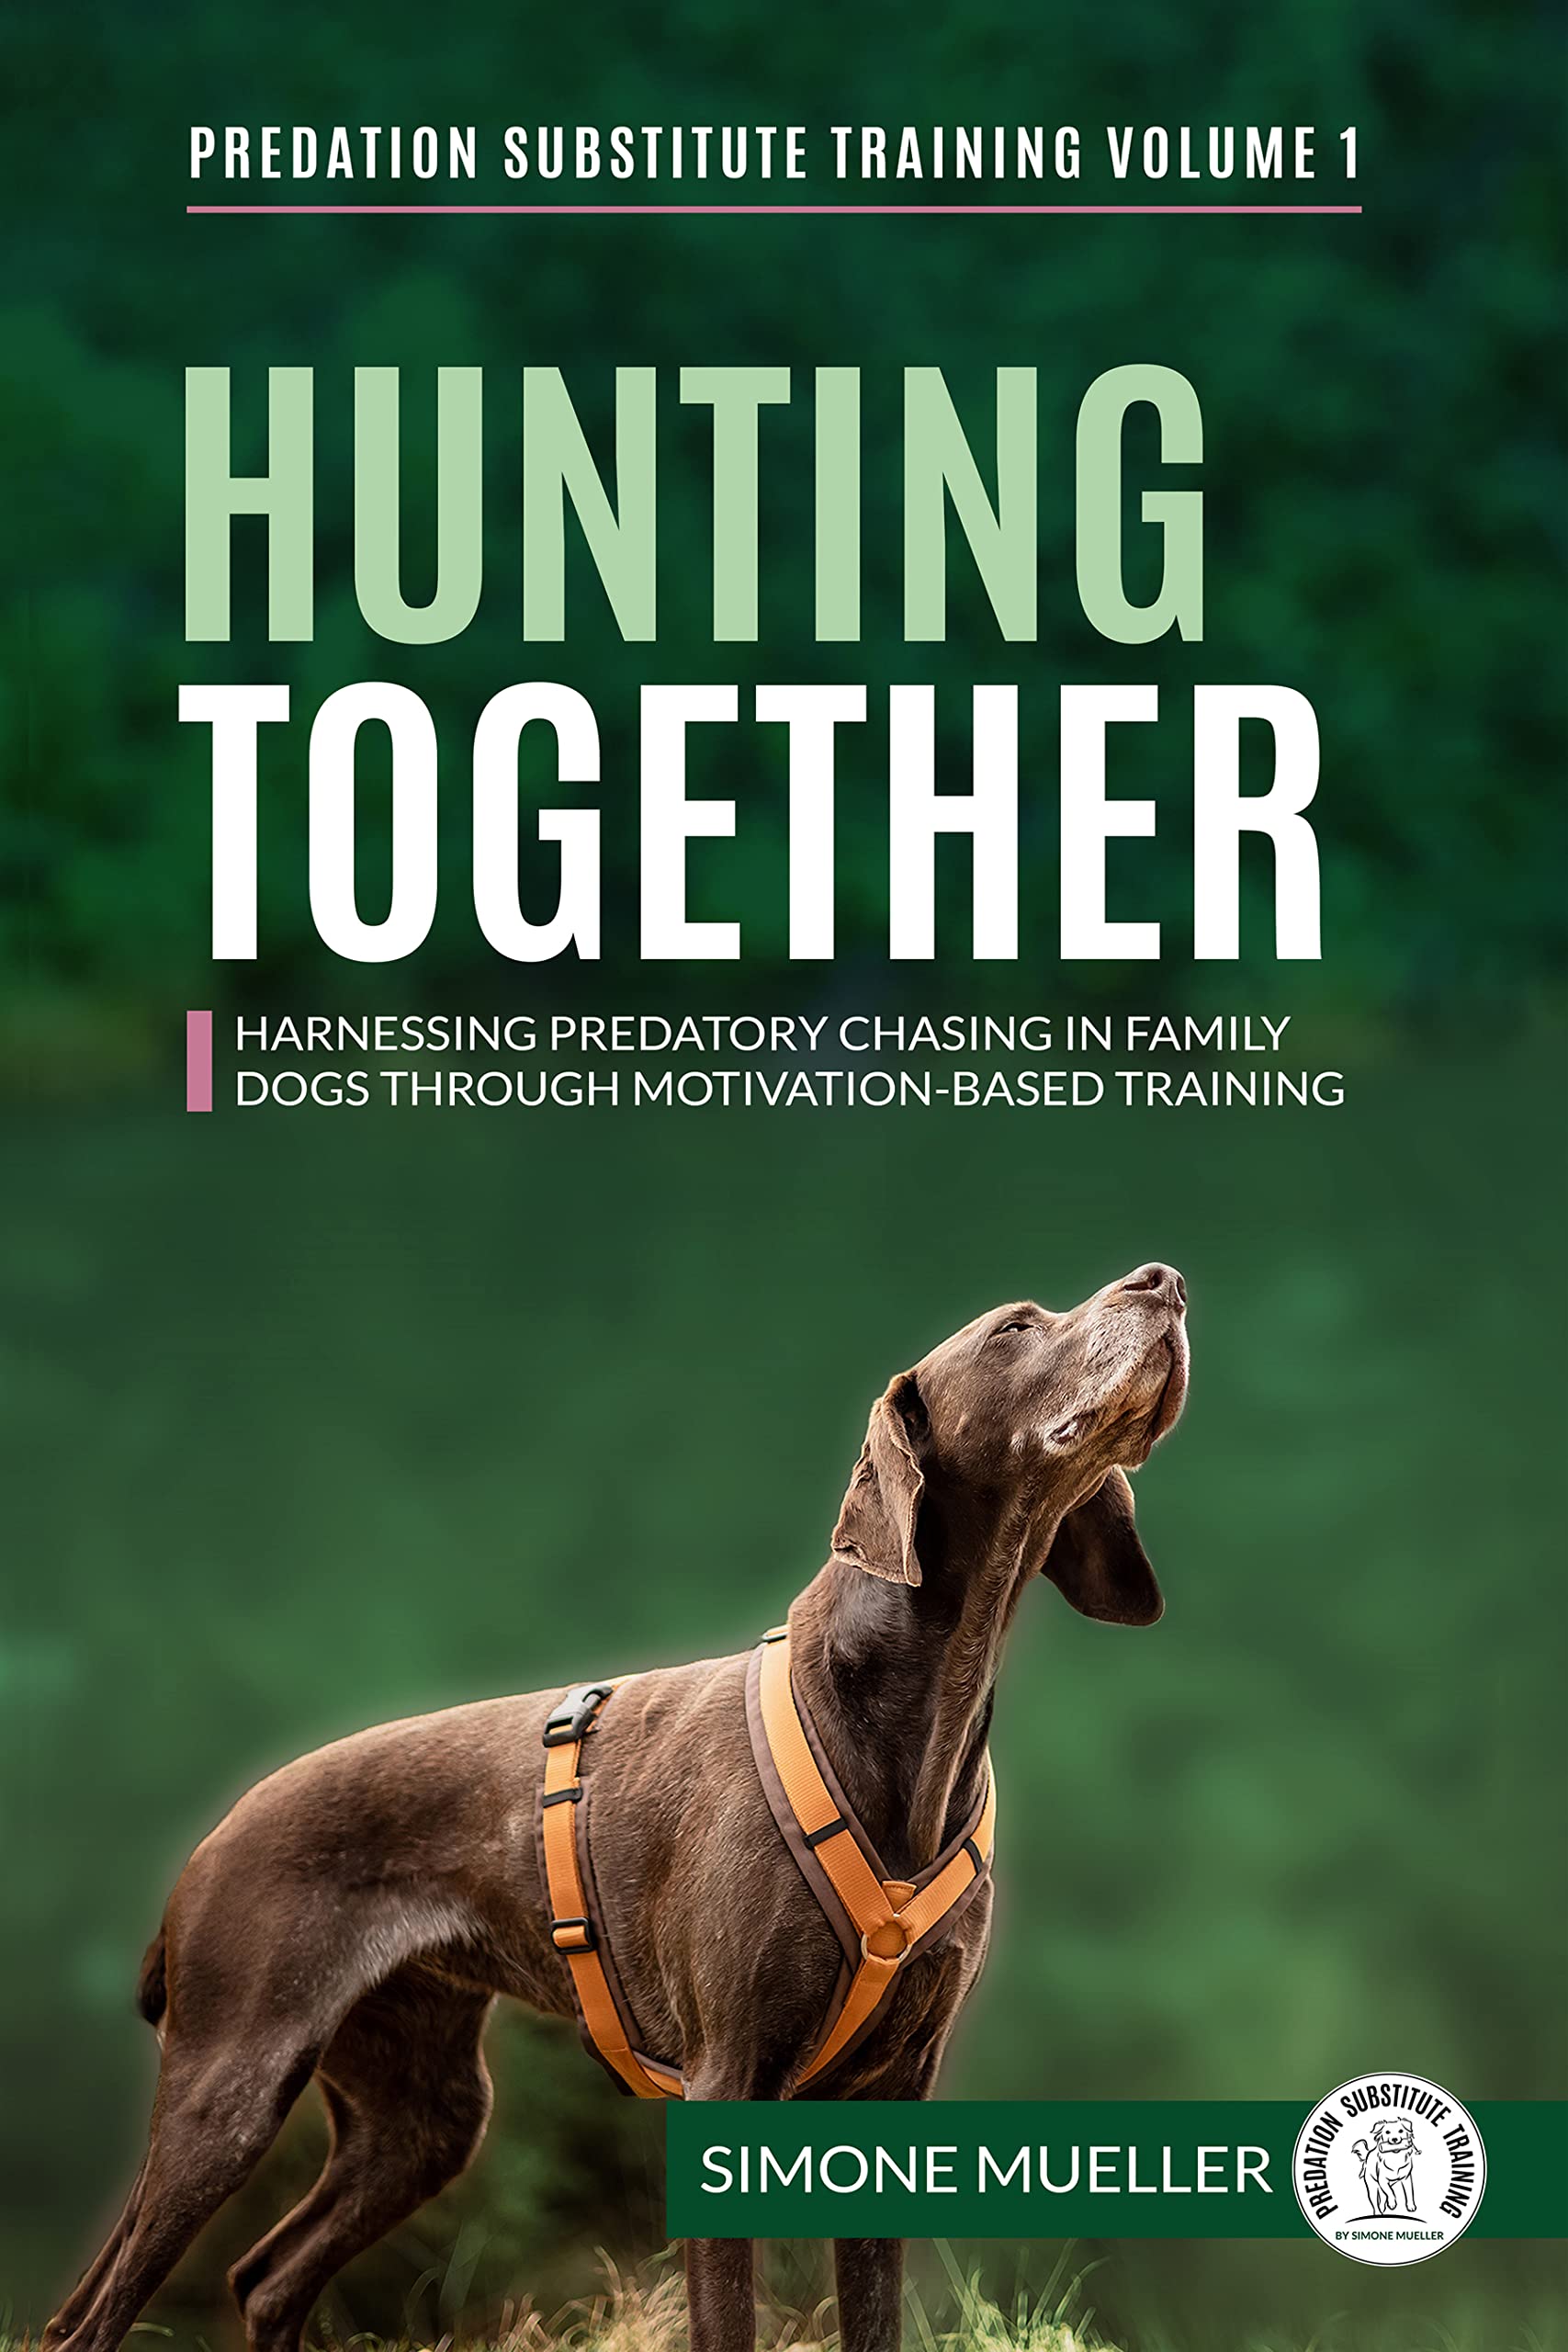 Hunting Together: Harnessing Predatory Chasing in Family Dogs through Motivation-Based Training (Predation Substitute Training)